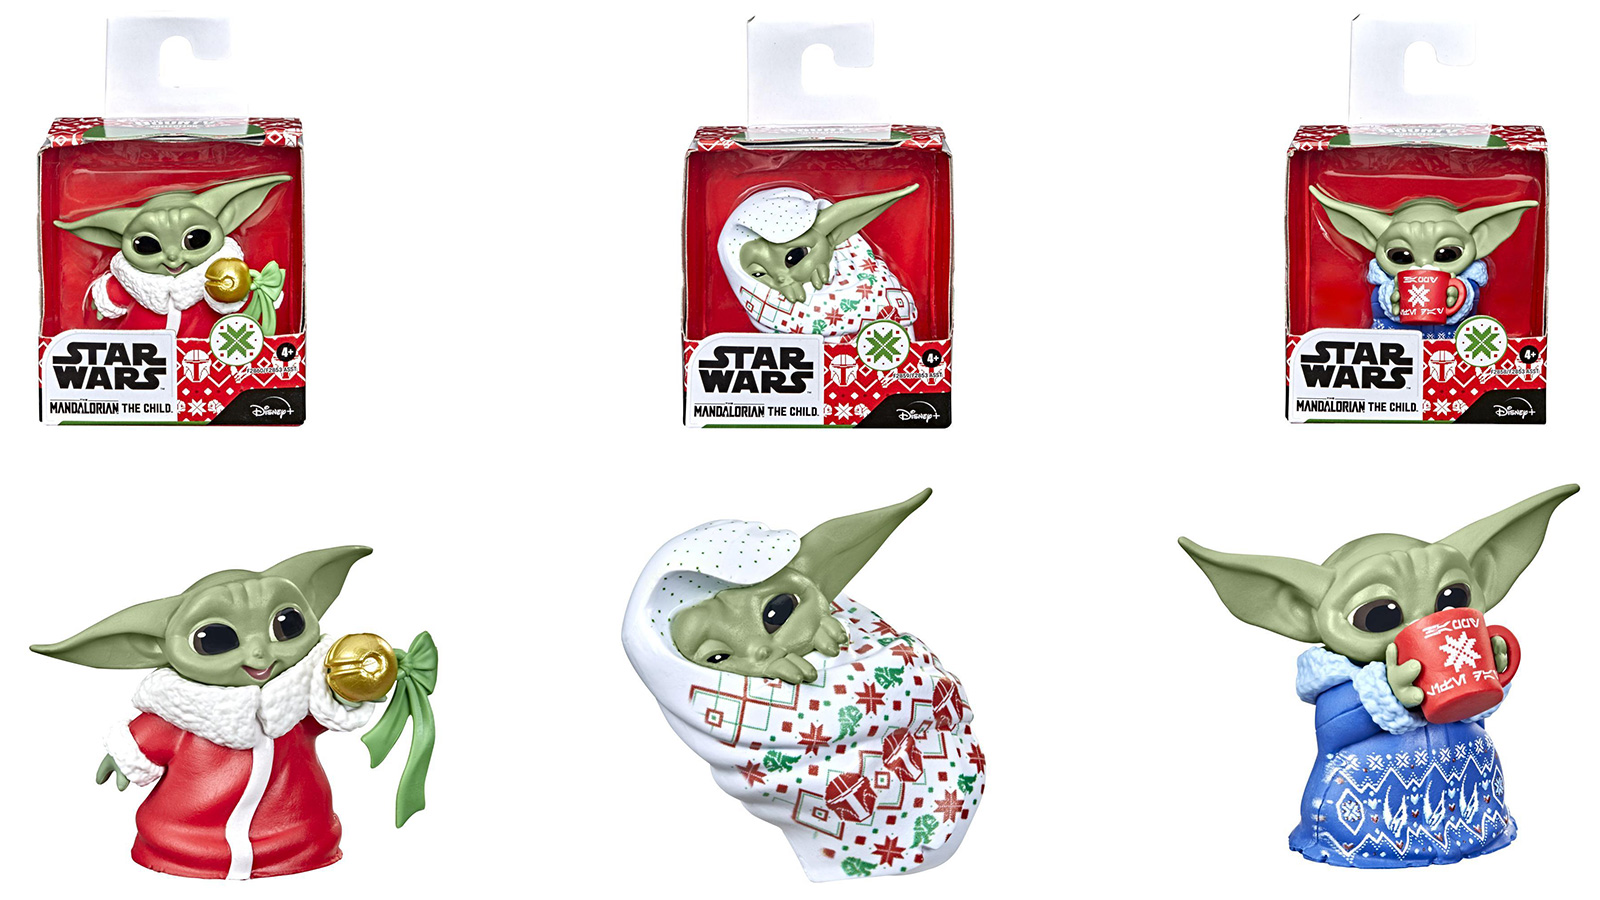 Bring Home The Bounty Week 7 - Hasbro The Bounty Collection Grogu (The Child) Holiday Edition Figures